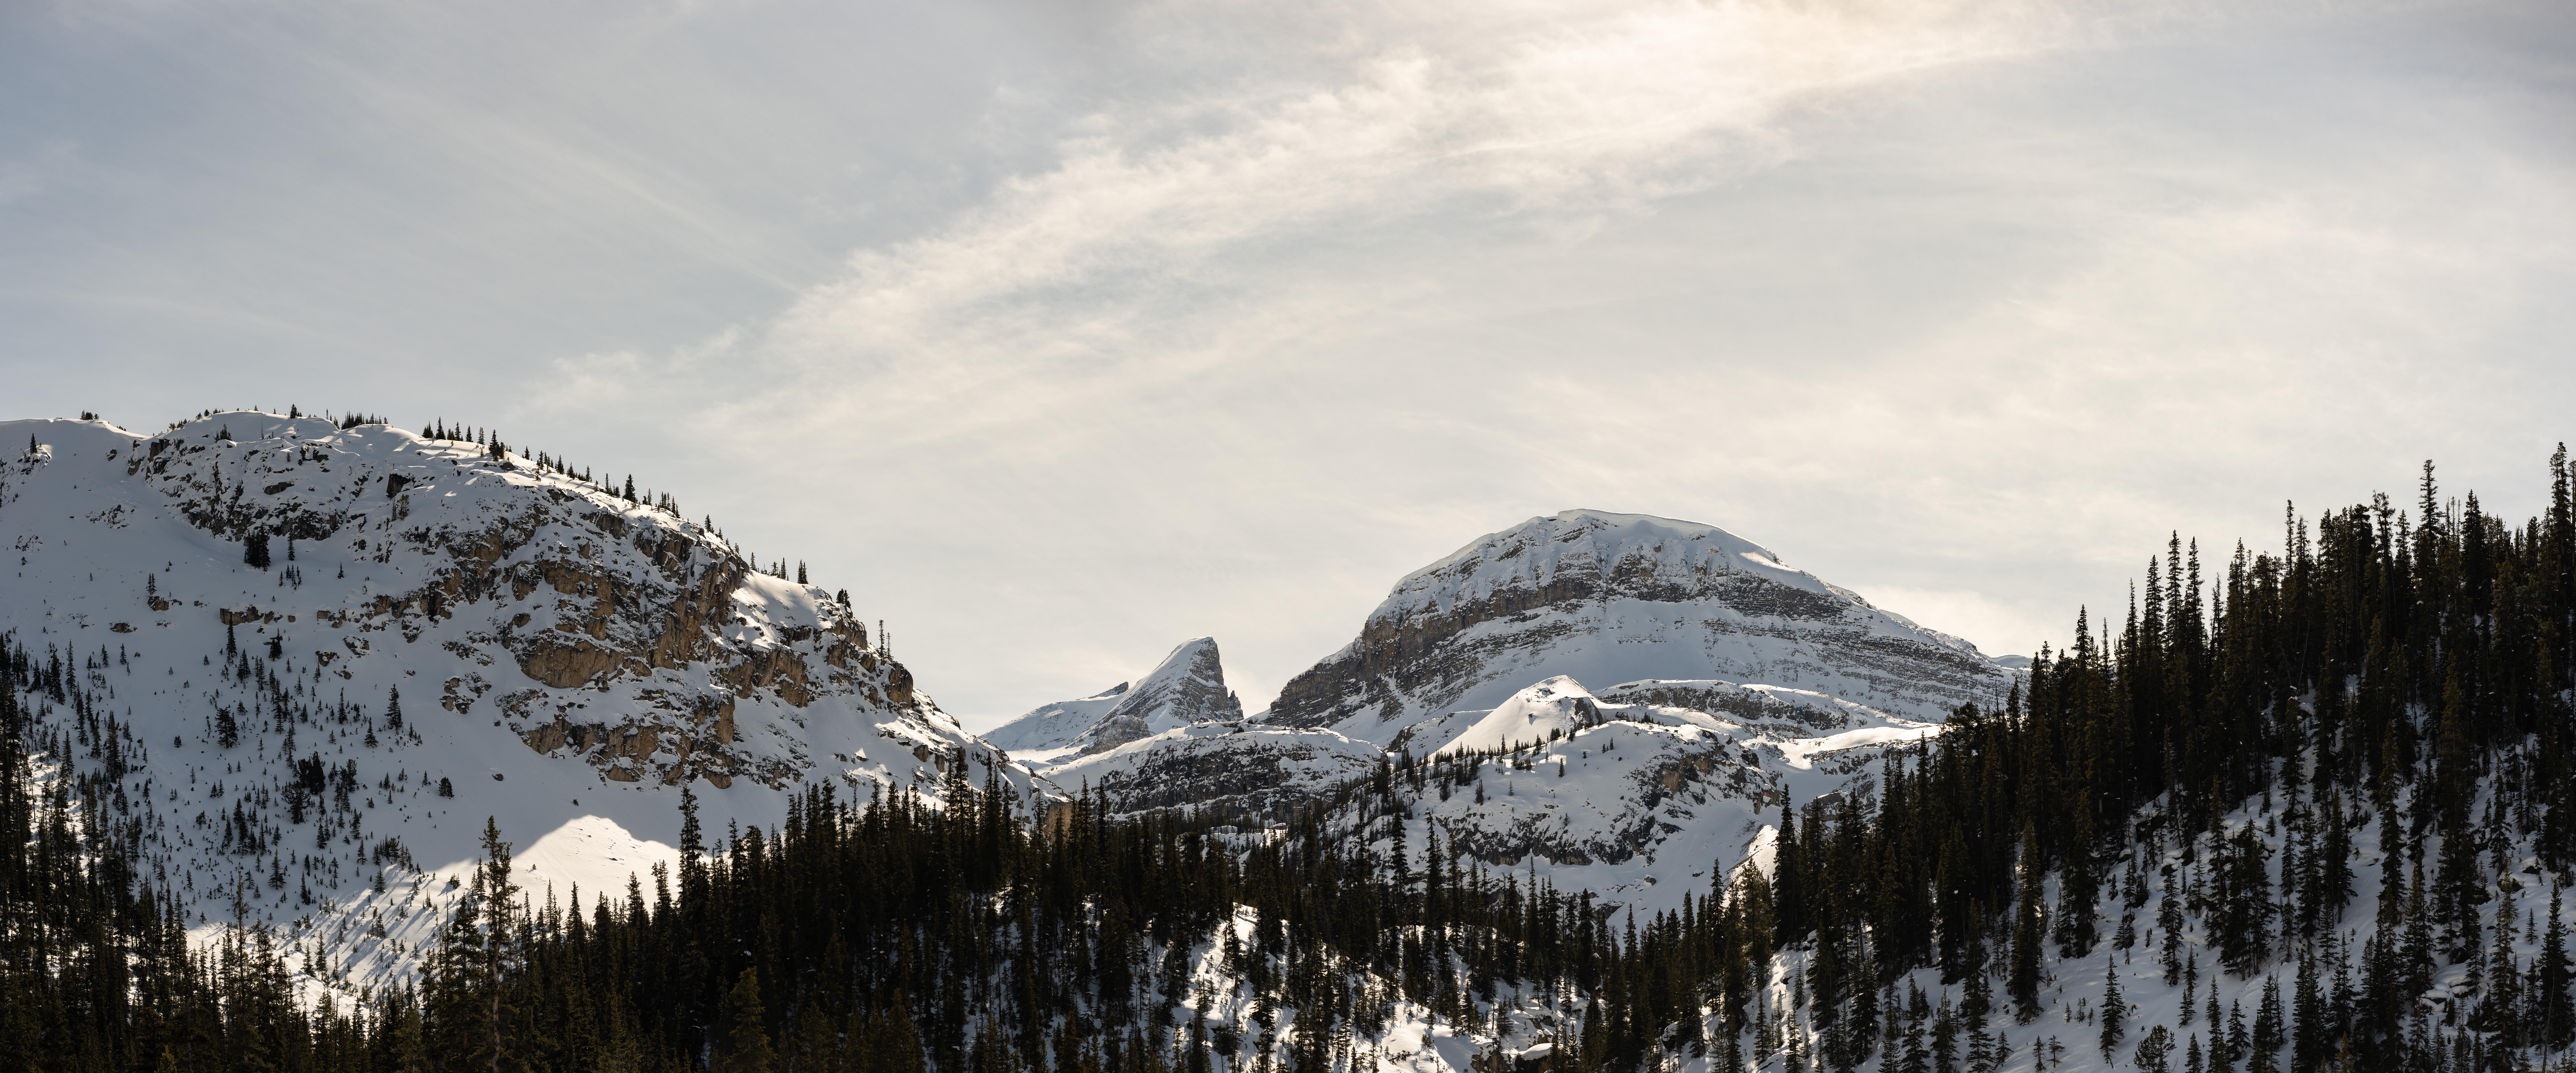 Canada Alberta Banff Nature Landscape Forest Snow Winter Mountains Panorama Cliff Cirrus Clouds 14837x6182